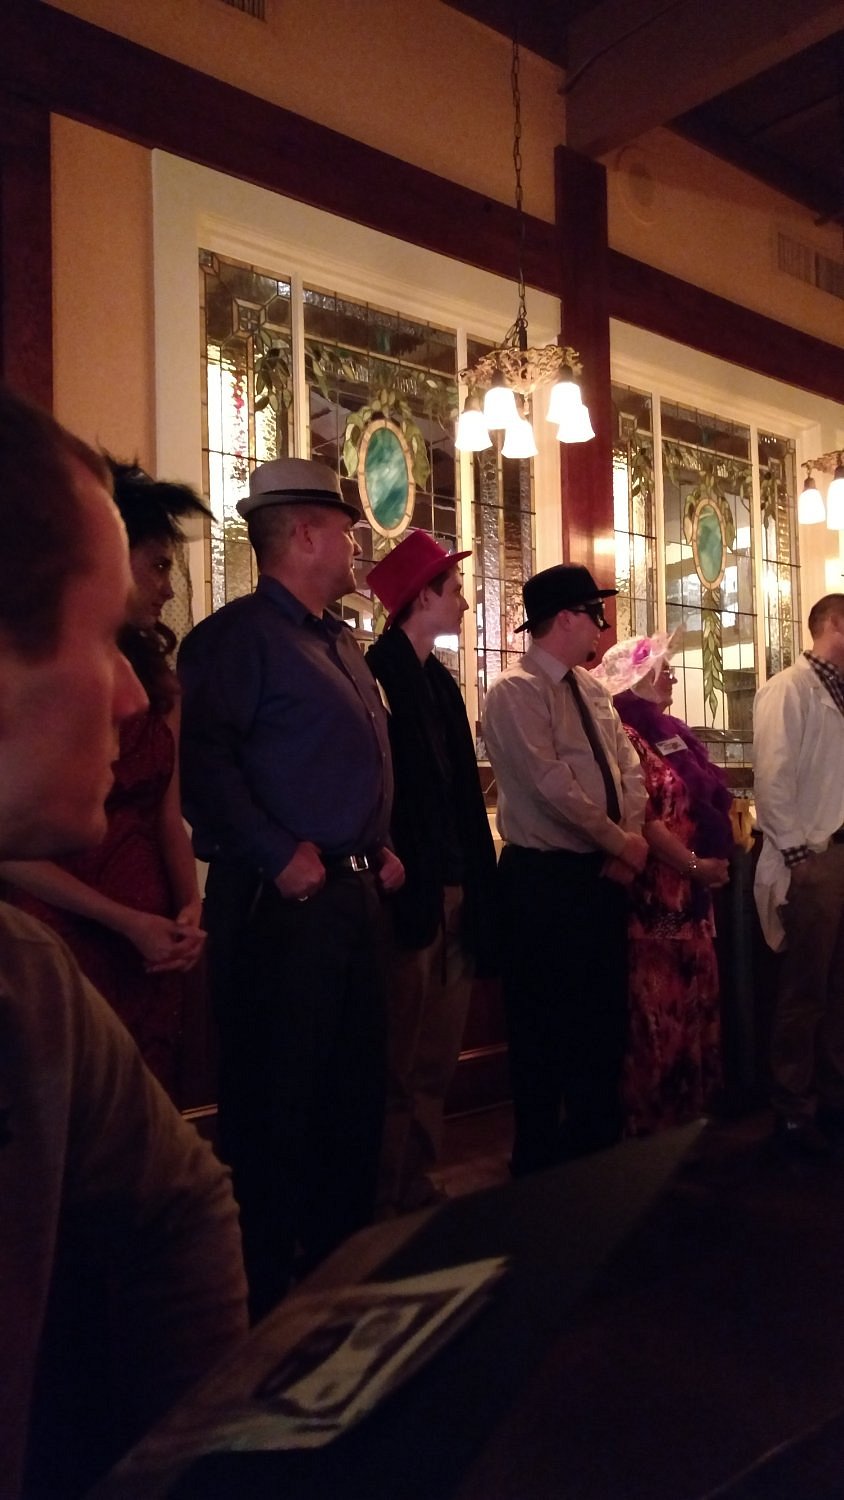 Murder Mystery Dinner Shows In 80+ Cities